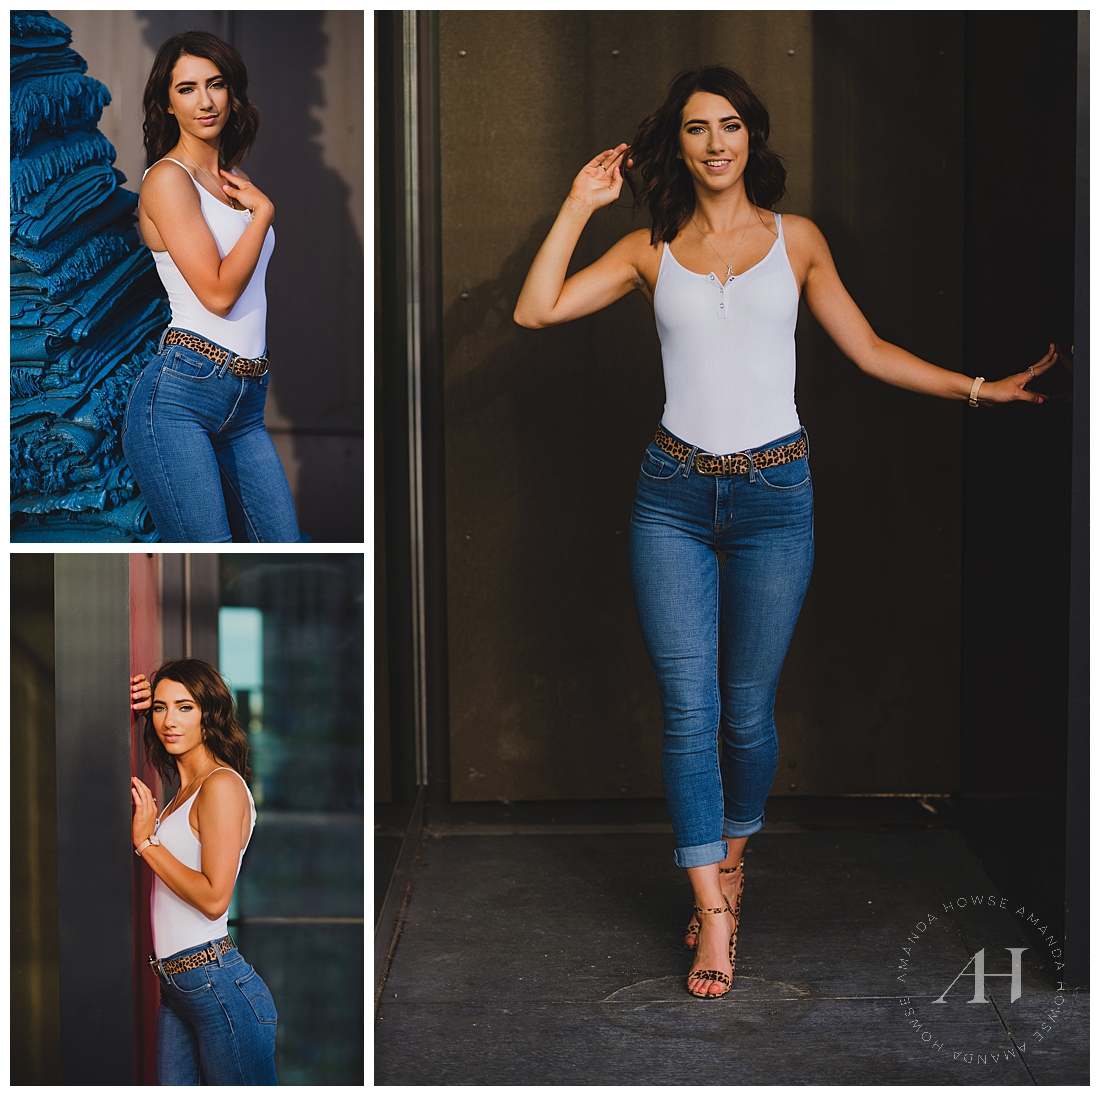 Timeless senior portraits with white tank top and jeans Photographed by Tacoma Senior Photographer Amanda Howse